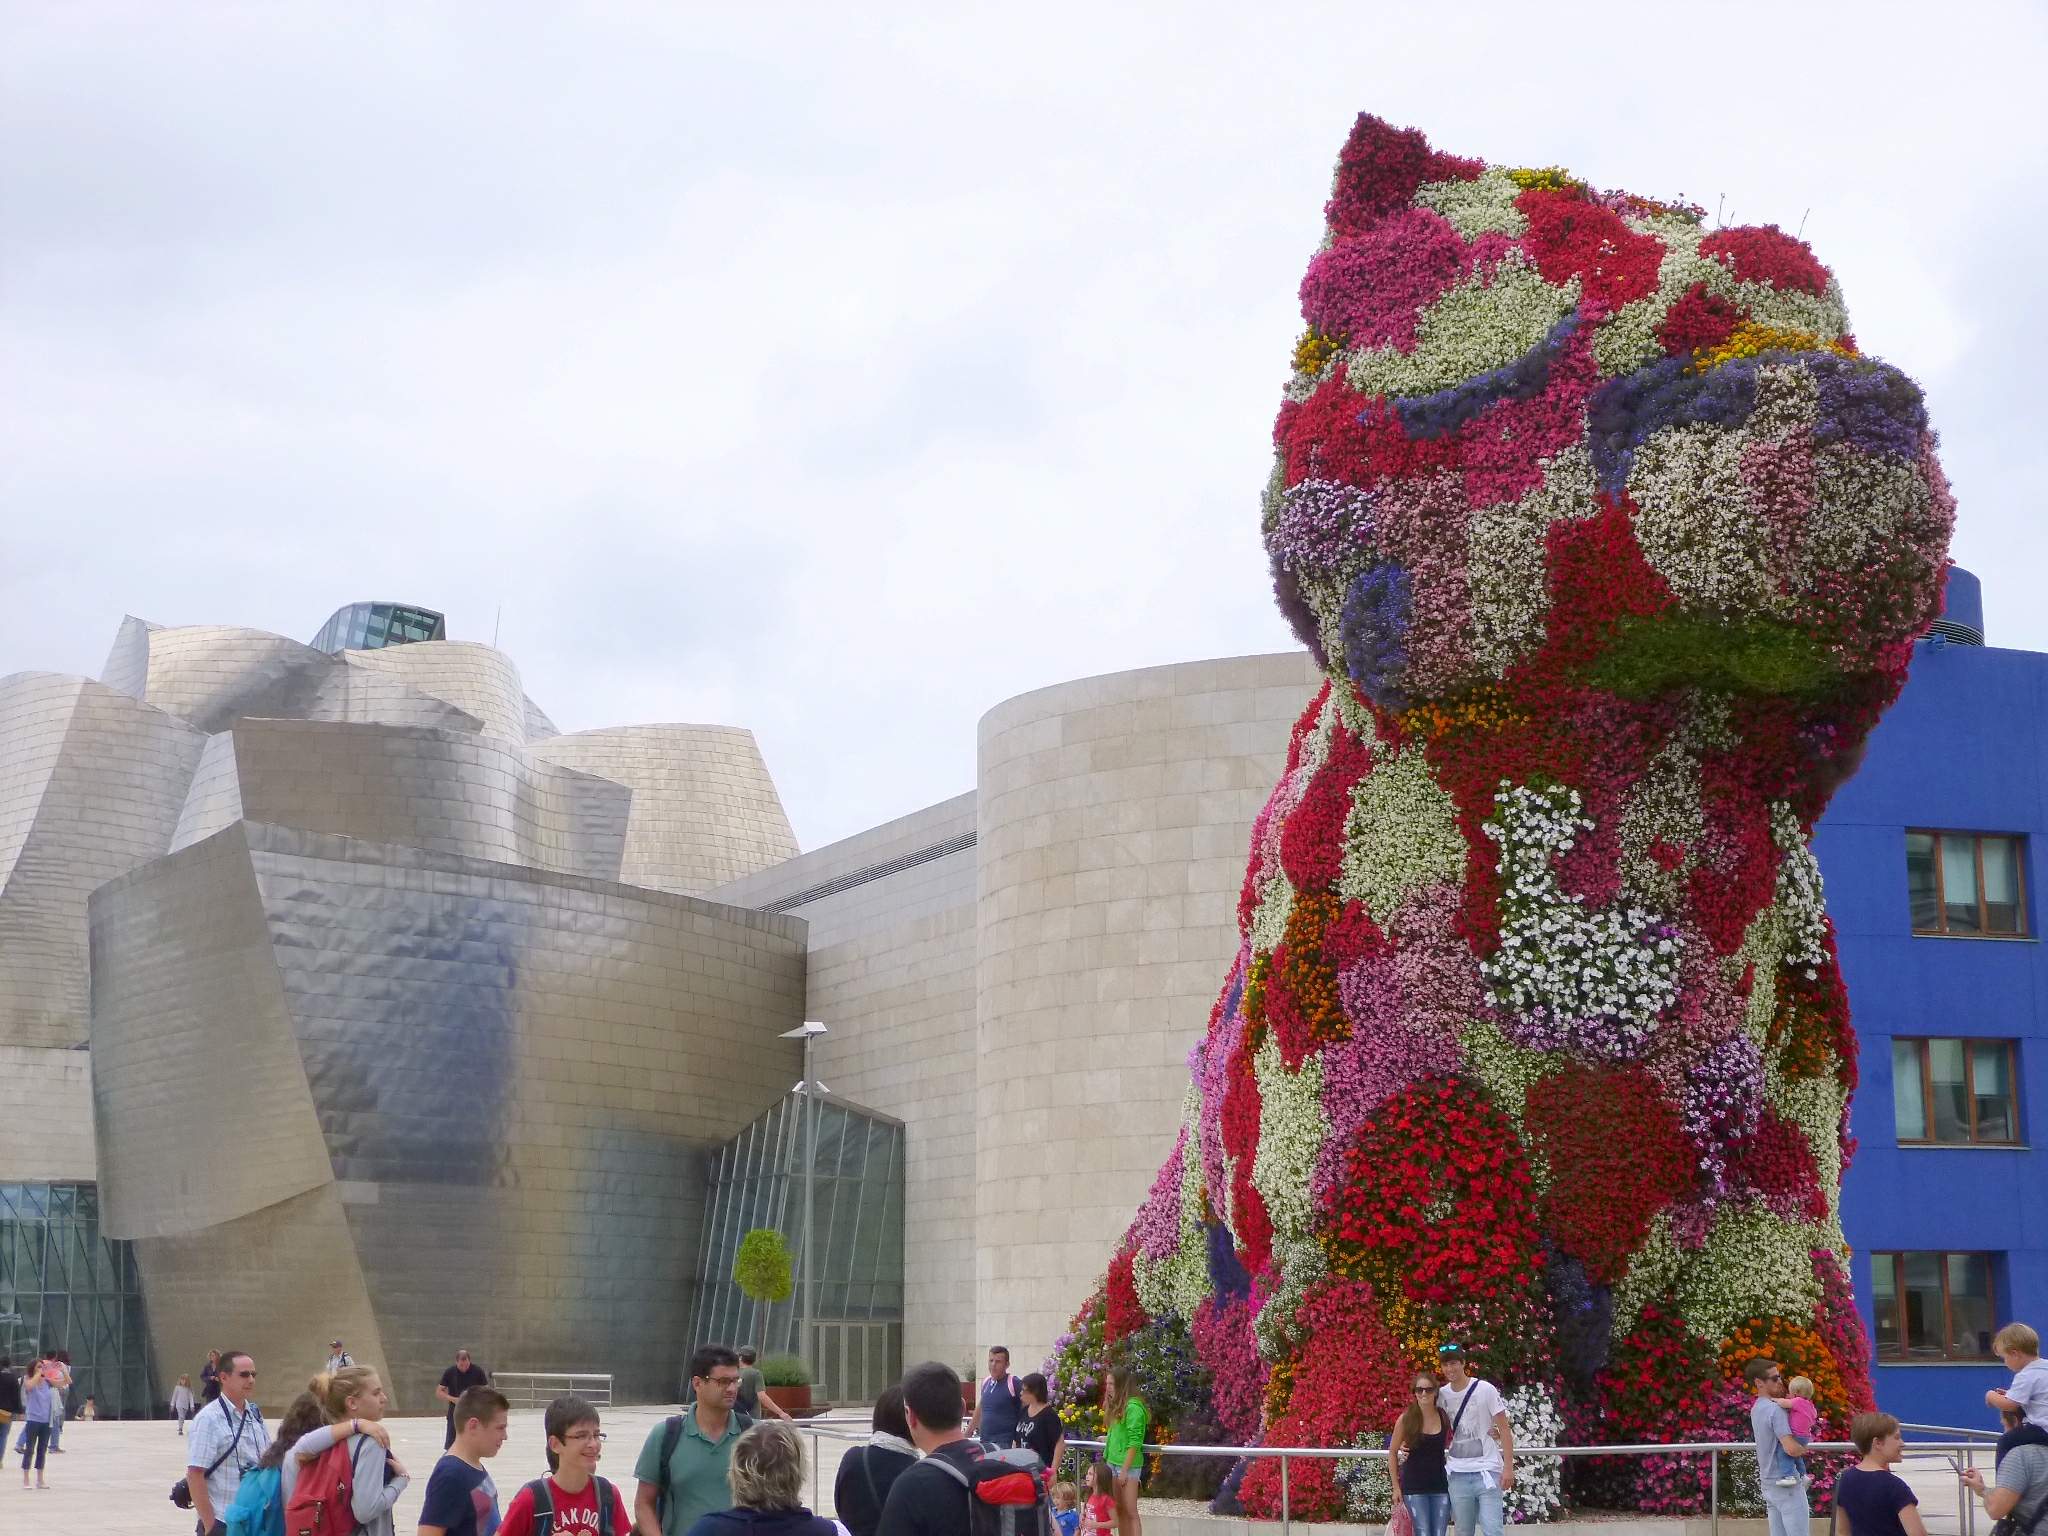 “Puppy” is an artwork by Jeff Koons